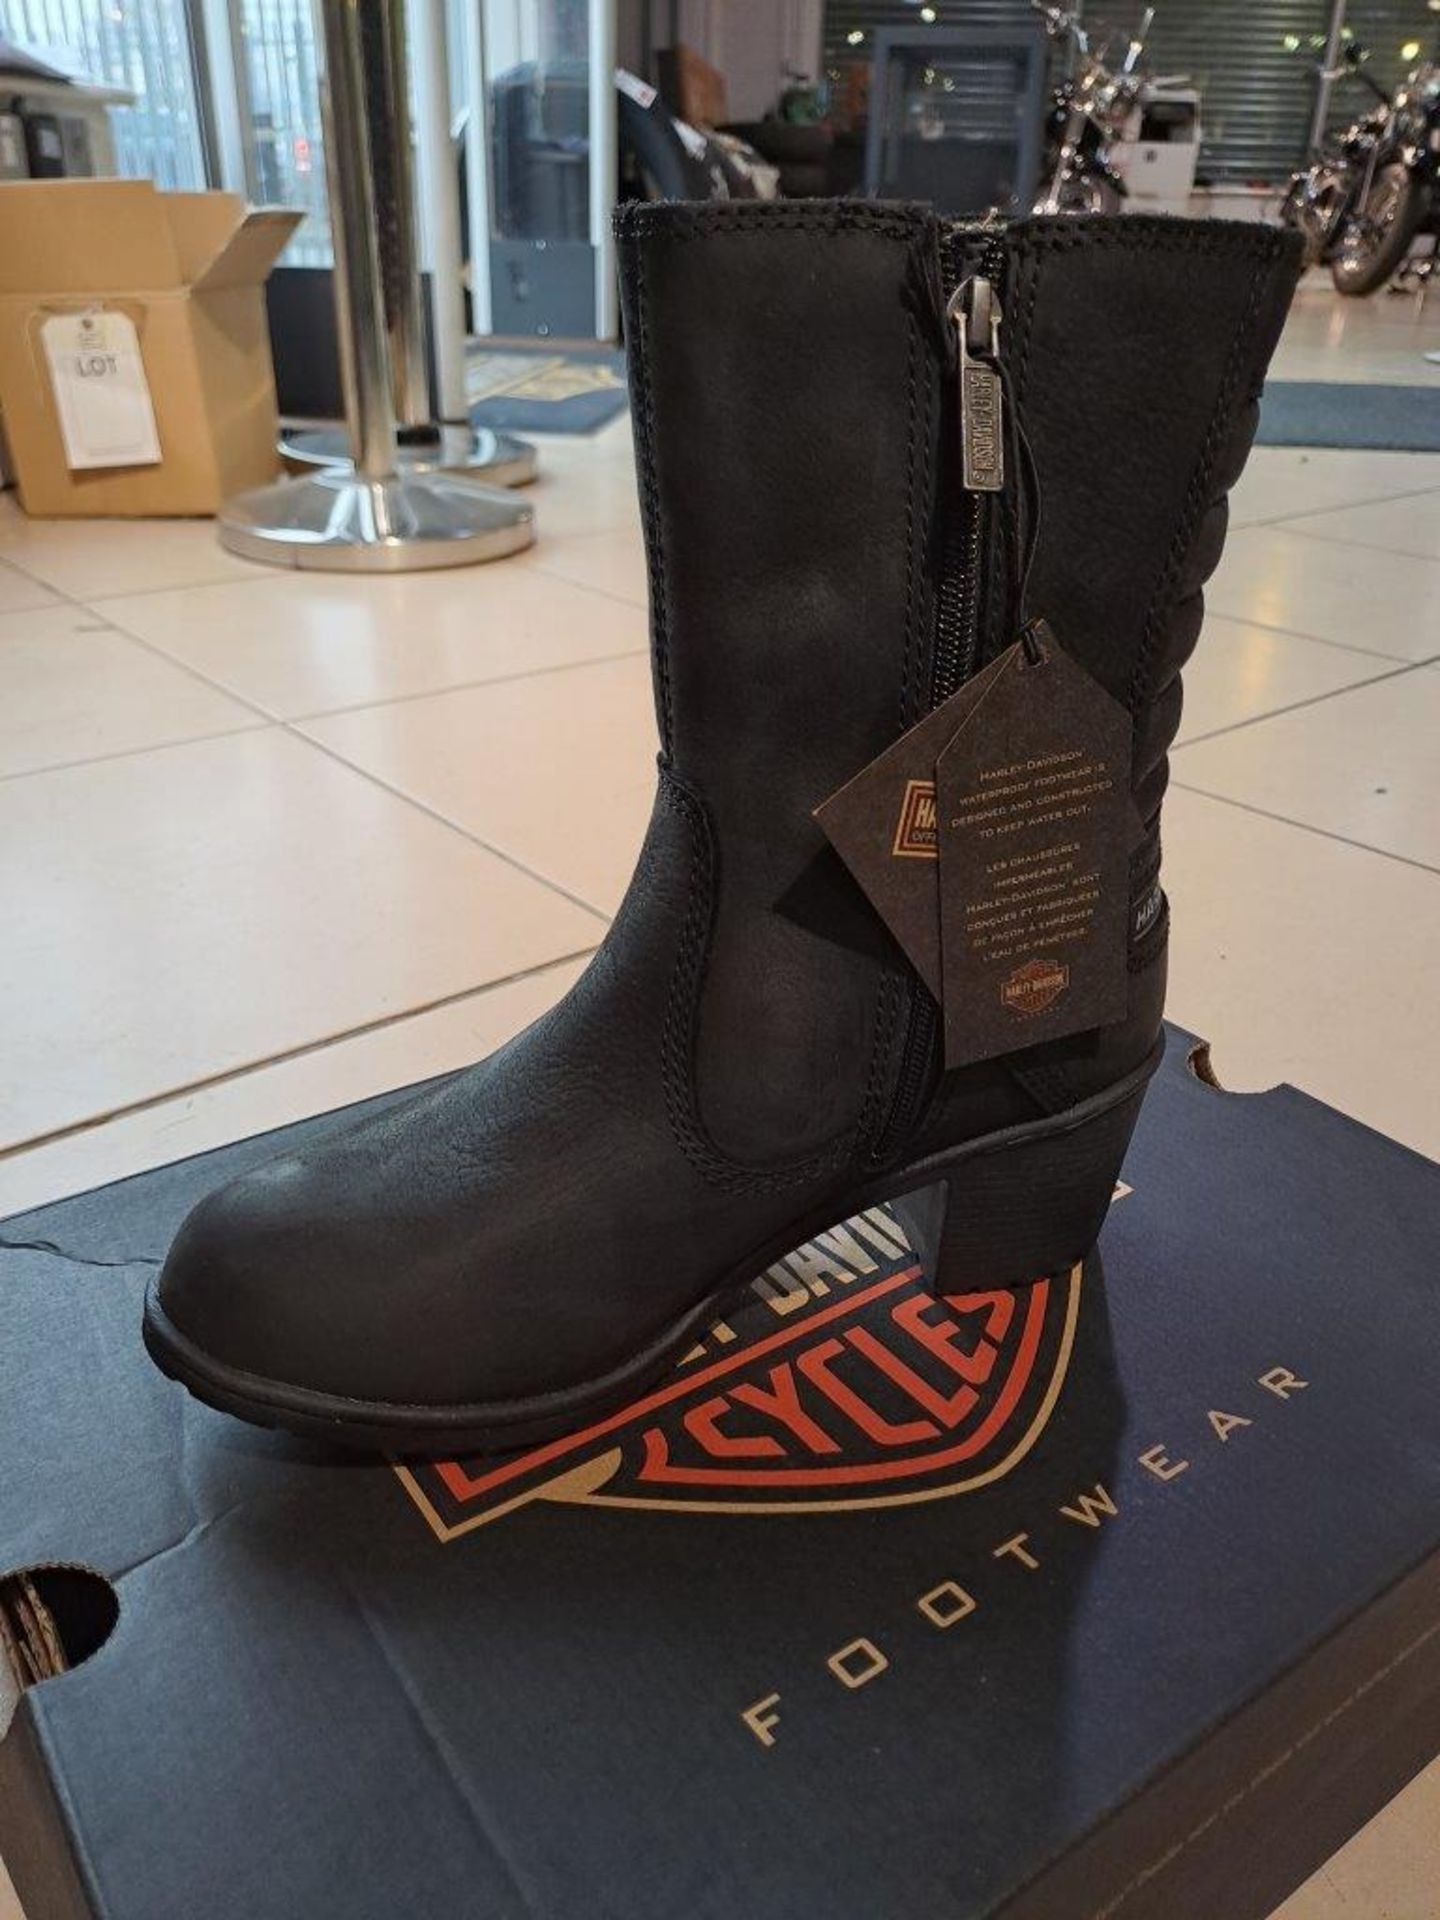 Harley Davidson FXRG-6 Size 6 Womens Boots - Image 3 of 10